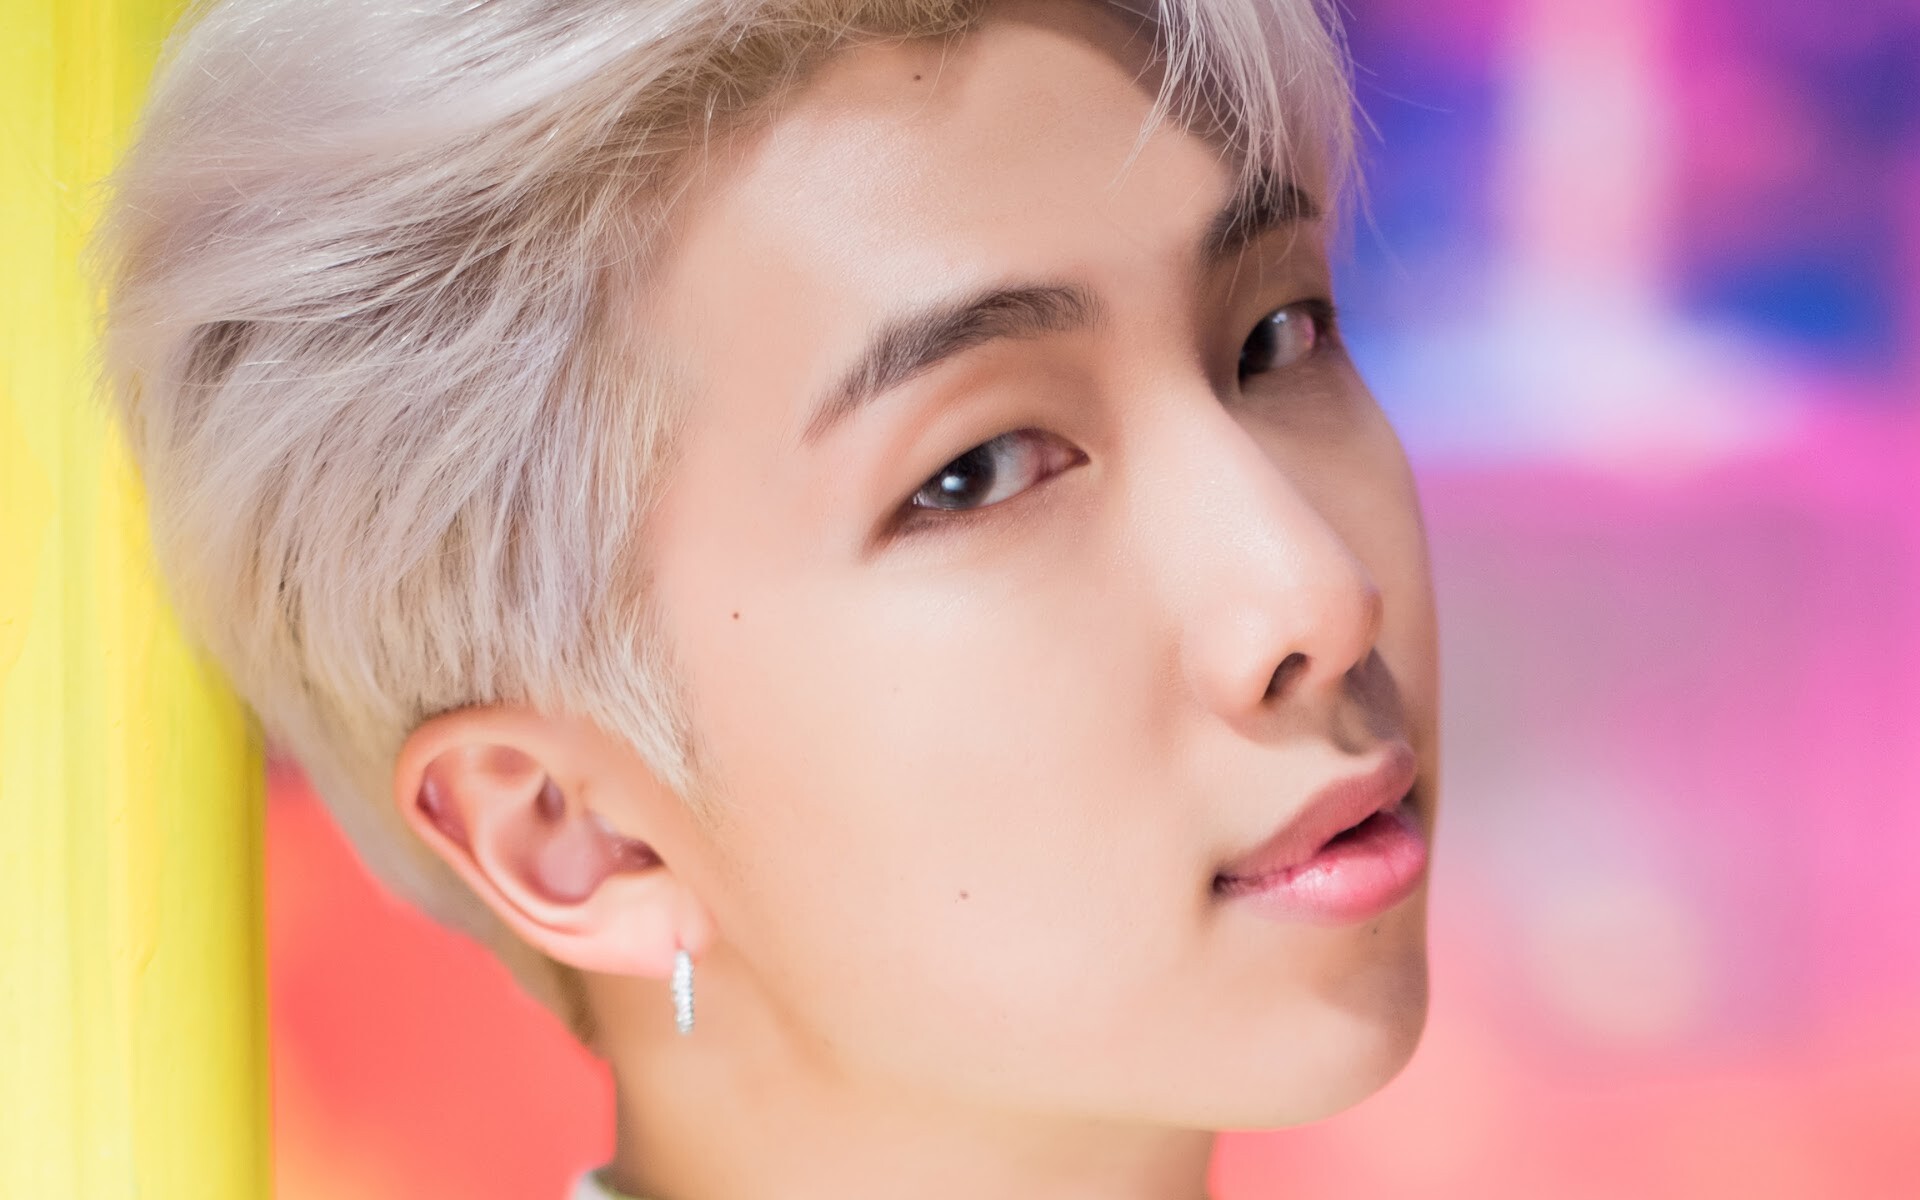 BTS: RM, the leader of the boy band, Boy With Luv. 1920x1200 HD Wallpaper.